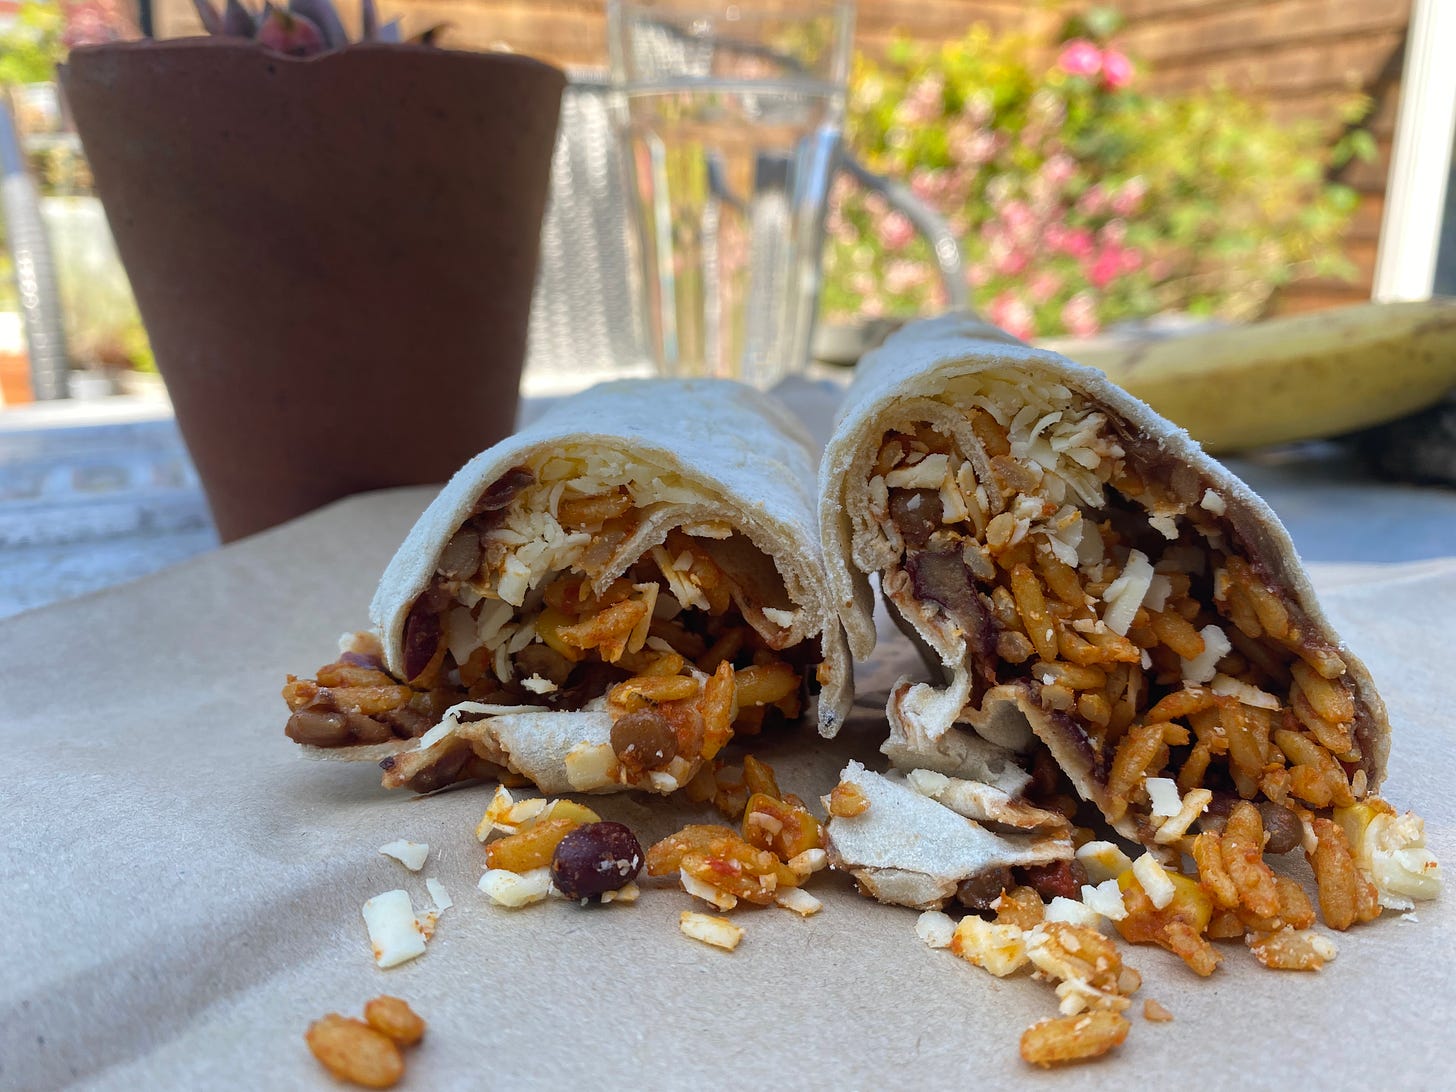 Sliced open burrito with its filling falling out, showing rice, beans and cheese. A terracotta pot, banana and glass of water in the background.